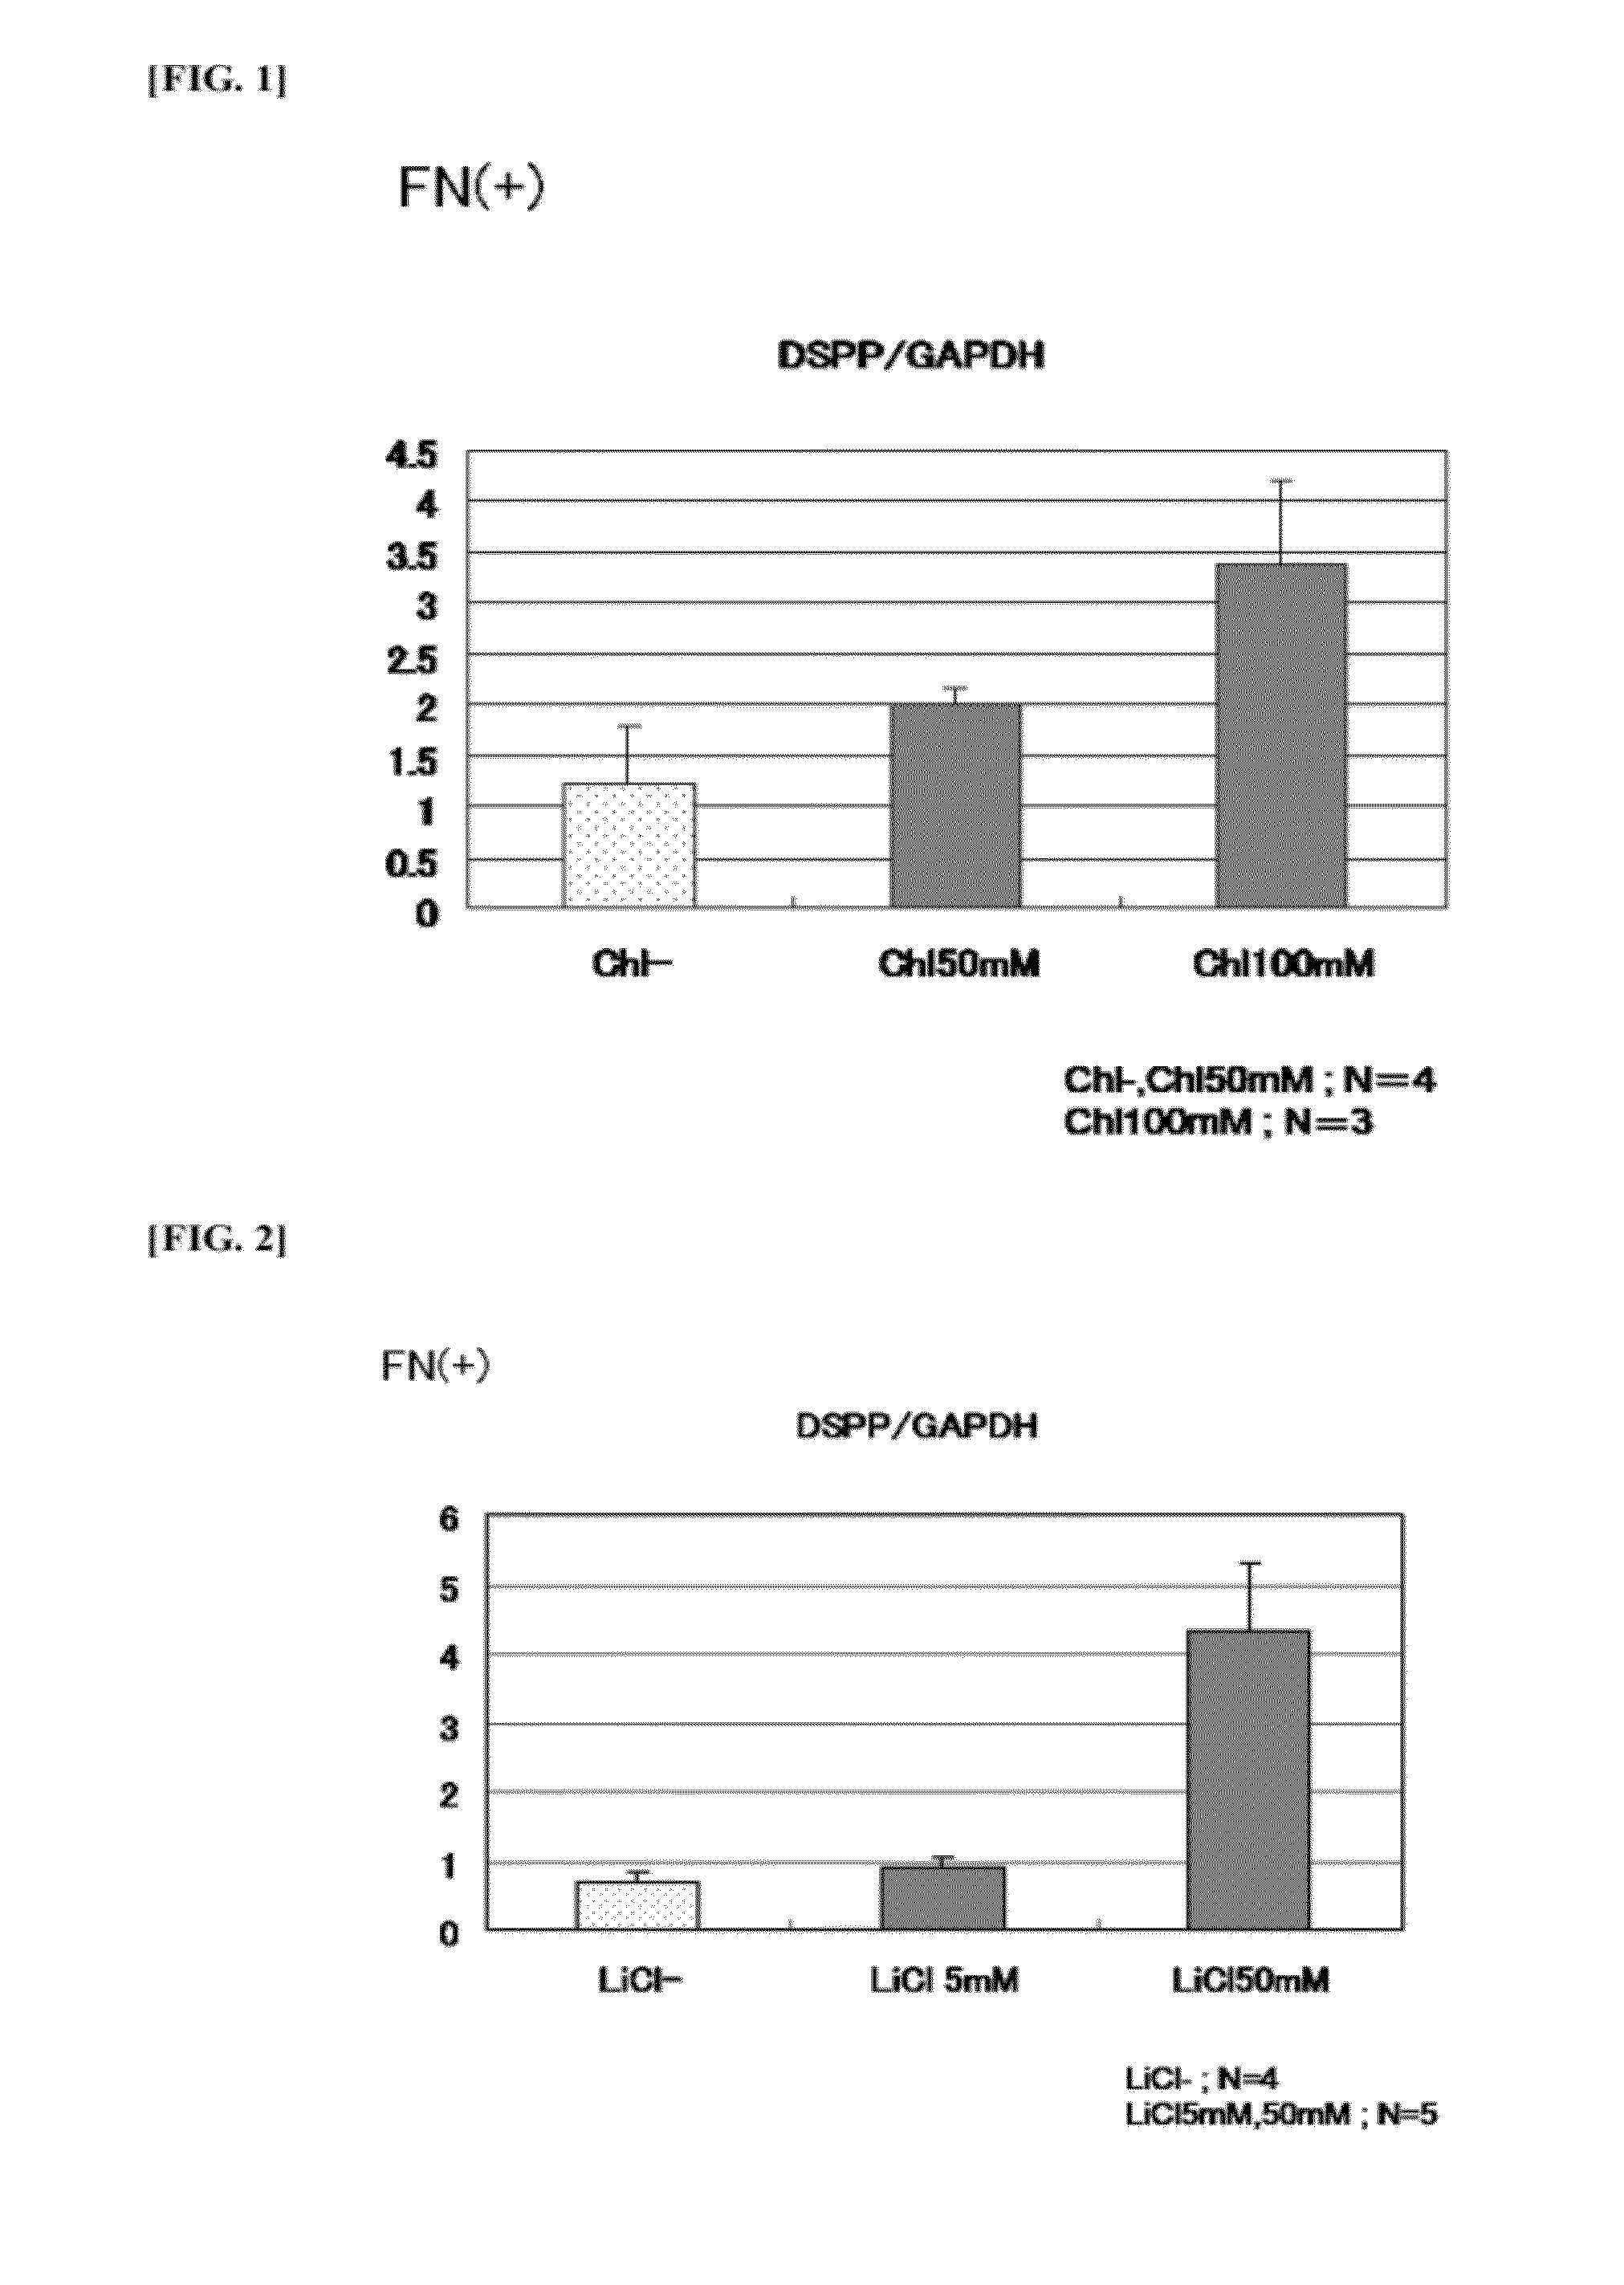 Method for Inducing Differentiation of Dental Pulp Cells Into Odontoblasts